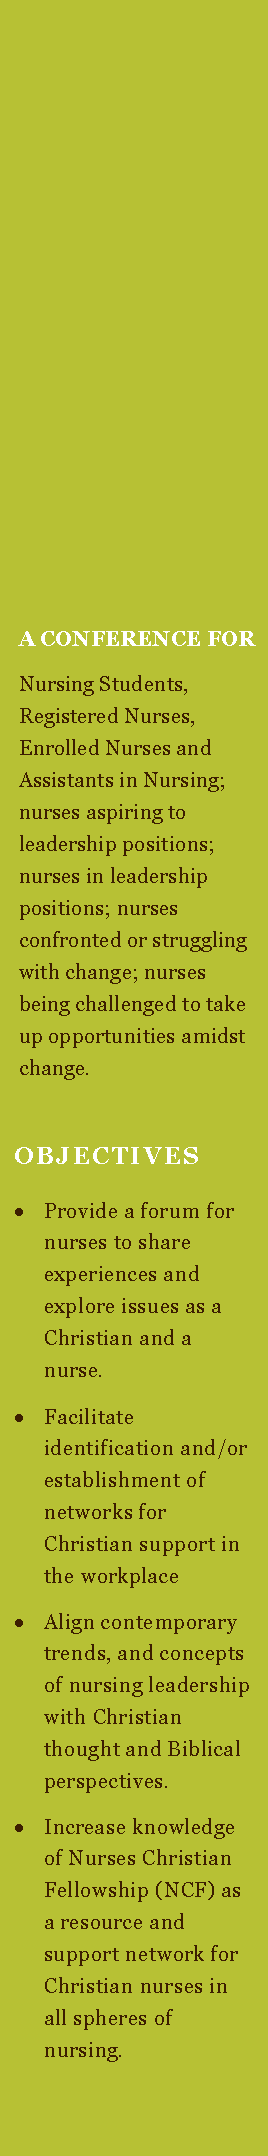 Text Box:           A CONFERENCE FOR  Nursing Students, Registered Nurses, Enrolled Nurses and Assistants in Nursing; nurses aspiring to leadership positions; nurses in leadership positions; nurses confronted or struggling with change; nurses being challenged to take up opportunities amidst change.   OBJECTIVES  Provide a forum for nurses to share experiences and explore issues as a Christian and a nurse.Facilitate identification and/or establishment of networks for Christian support in the workplaceAlign contemporary trends, and concepts of nursing leadership with Christian thought and Biblical perspectives.Increase knowledge of Nurses Christian Fellowship (NCF) as a resource and support network for Christian nurses in all spheres of nursing. 